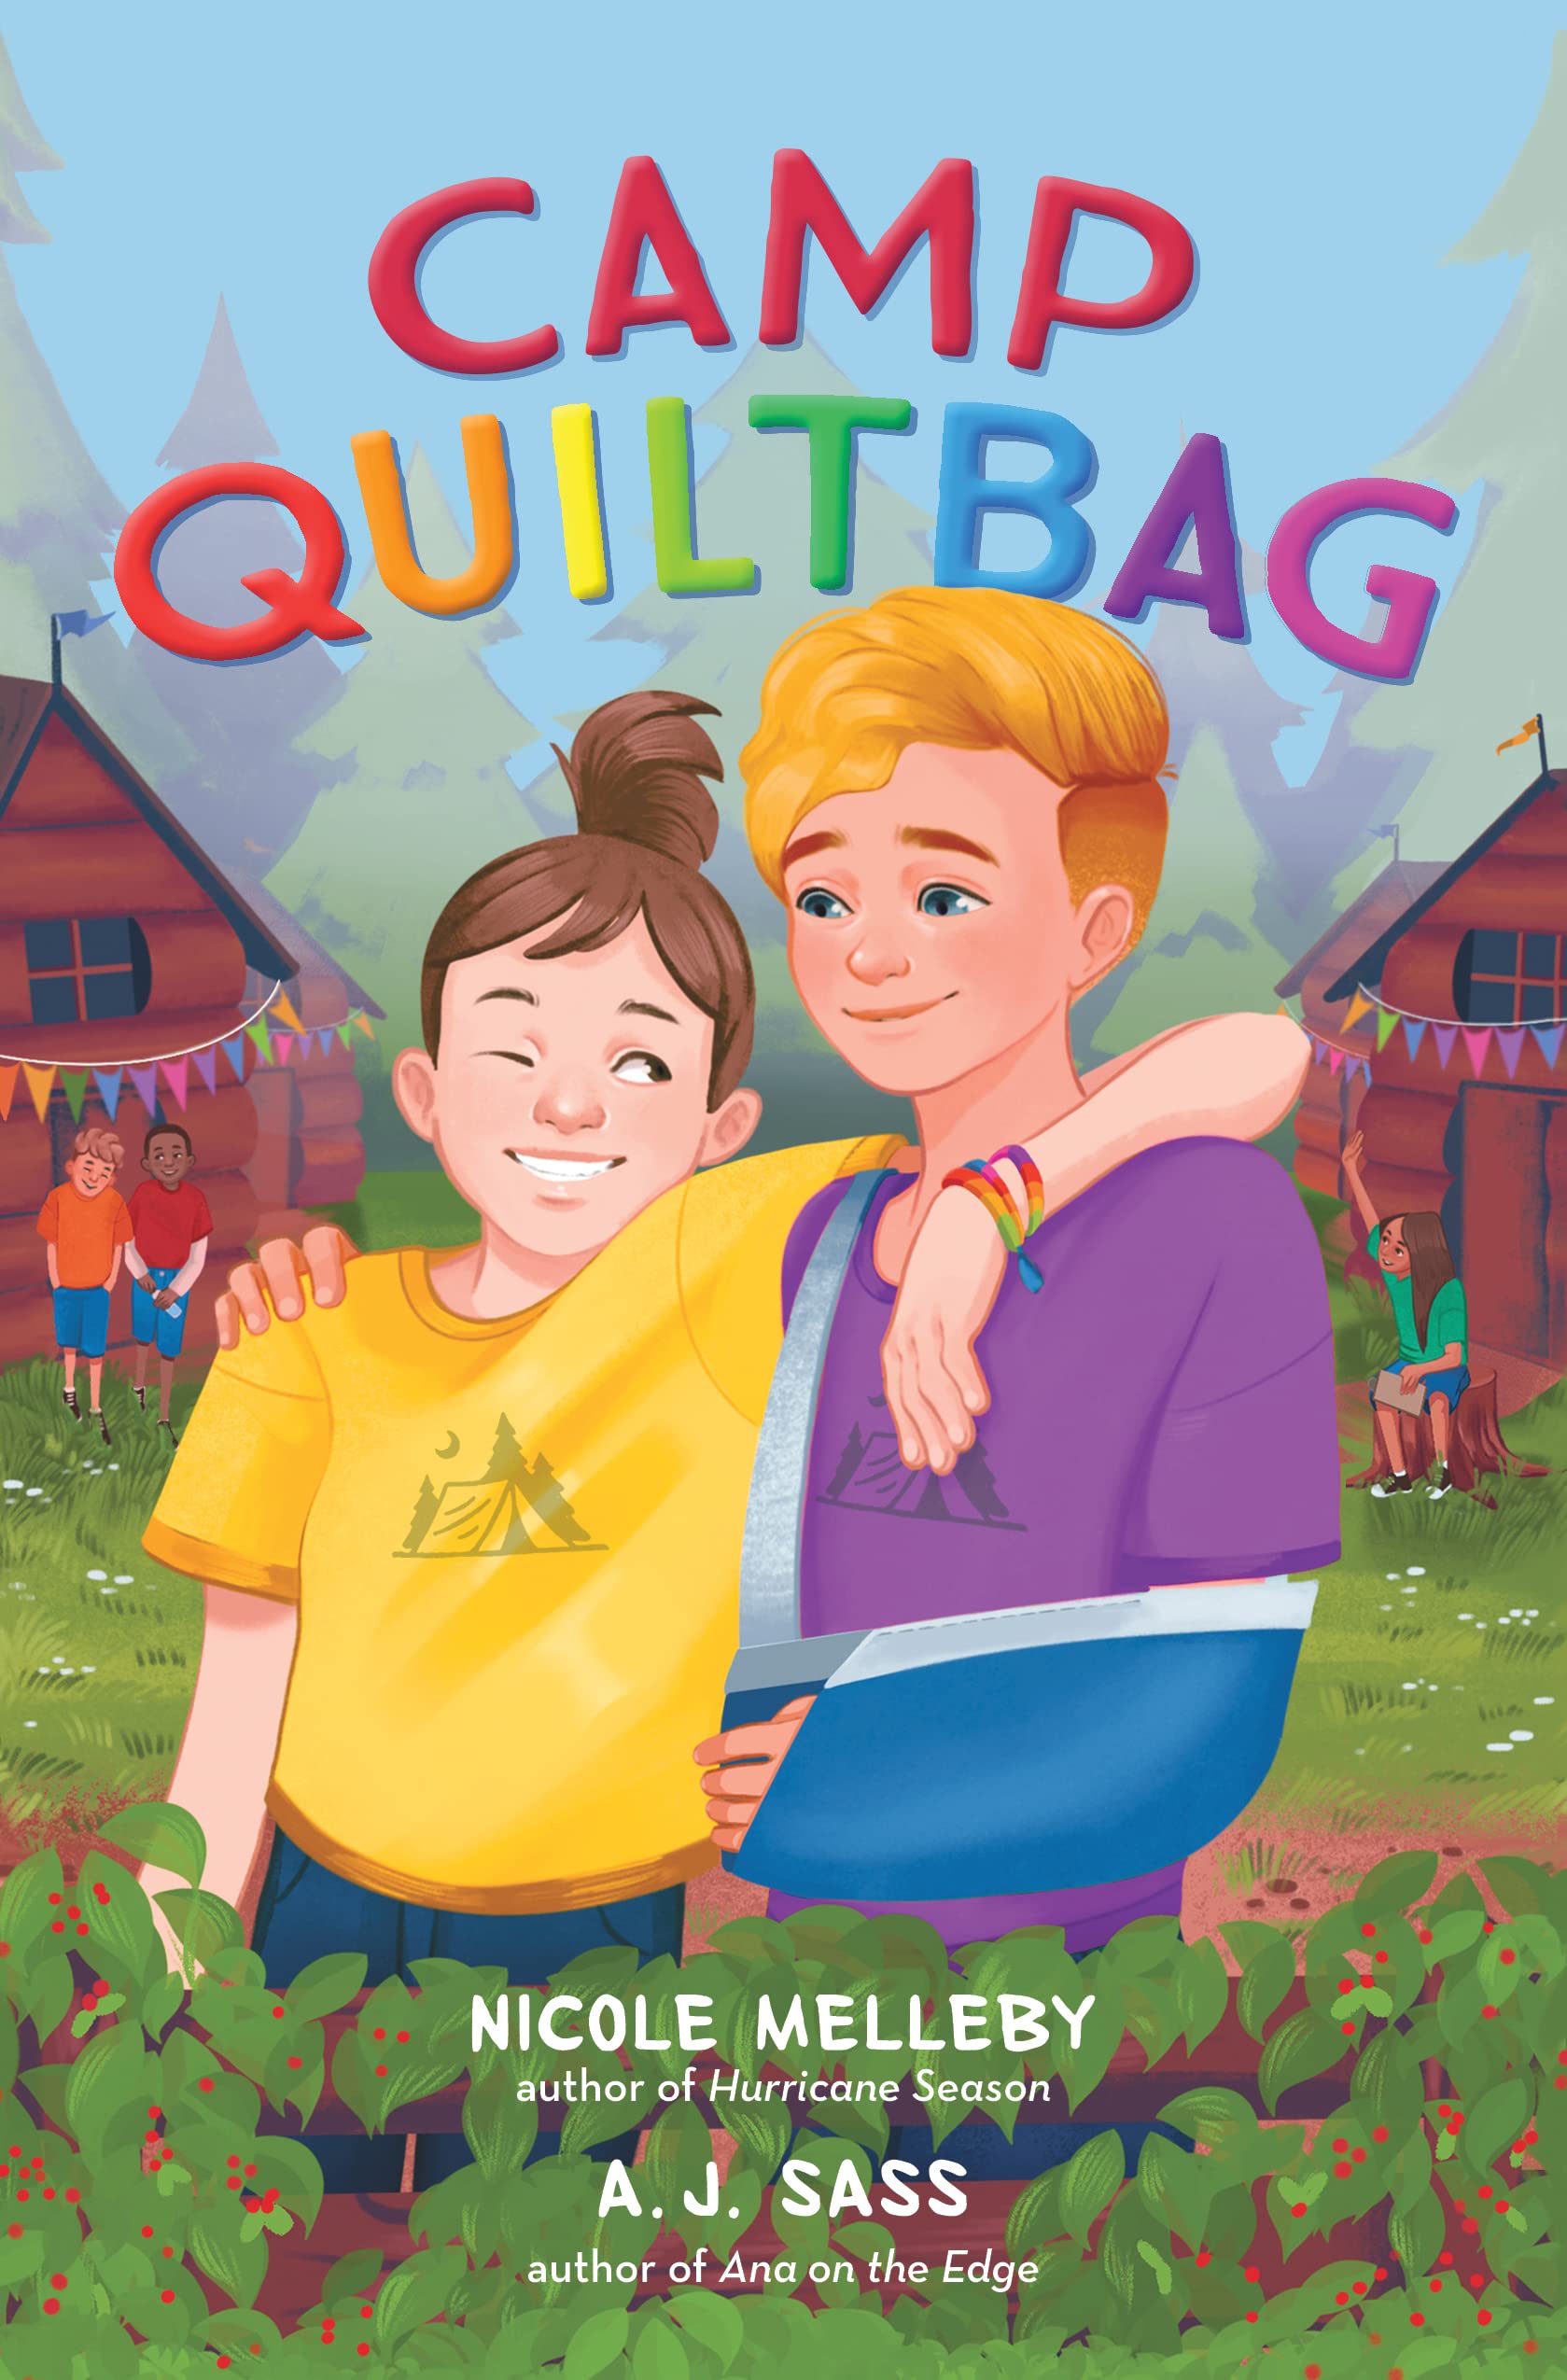 Camp QUILTBAG—25 Best New Books for 7th Graders